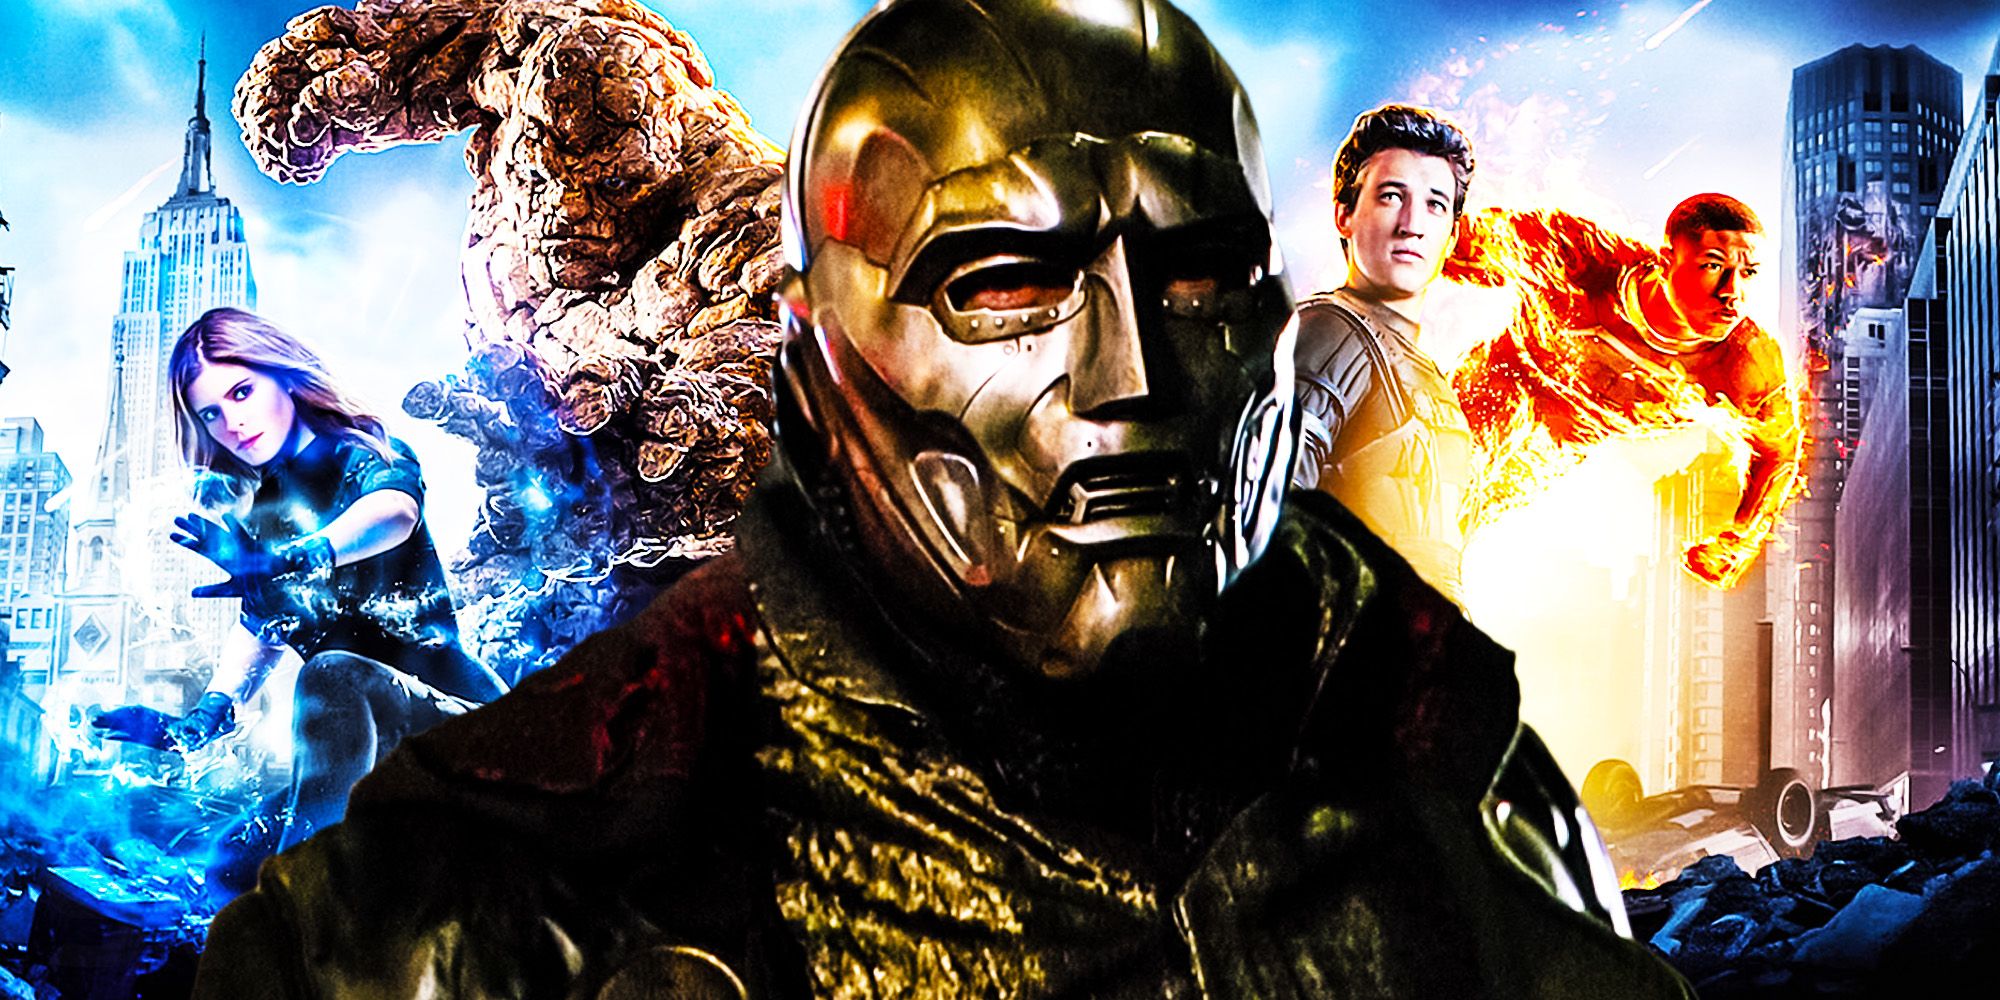 fantastic four's doctor doom in front of the f4antastic poster